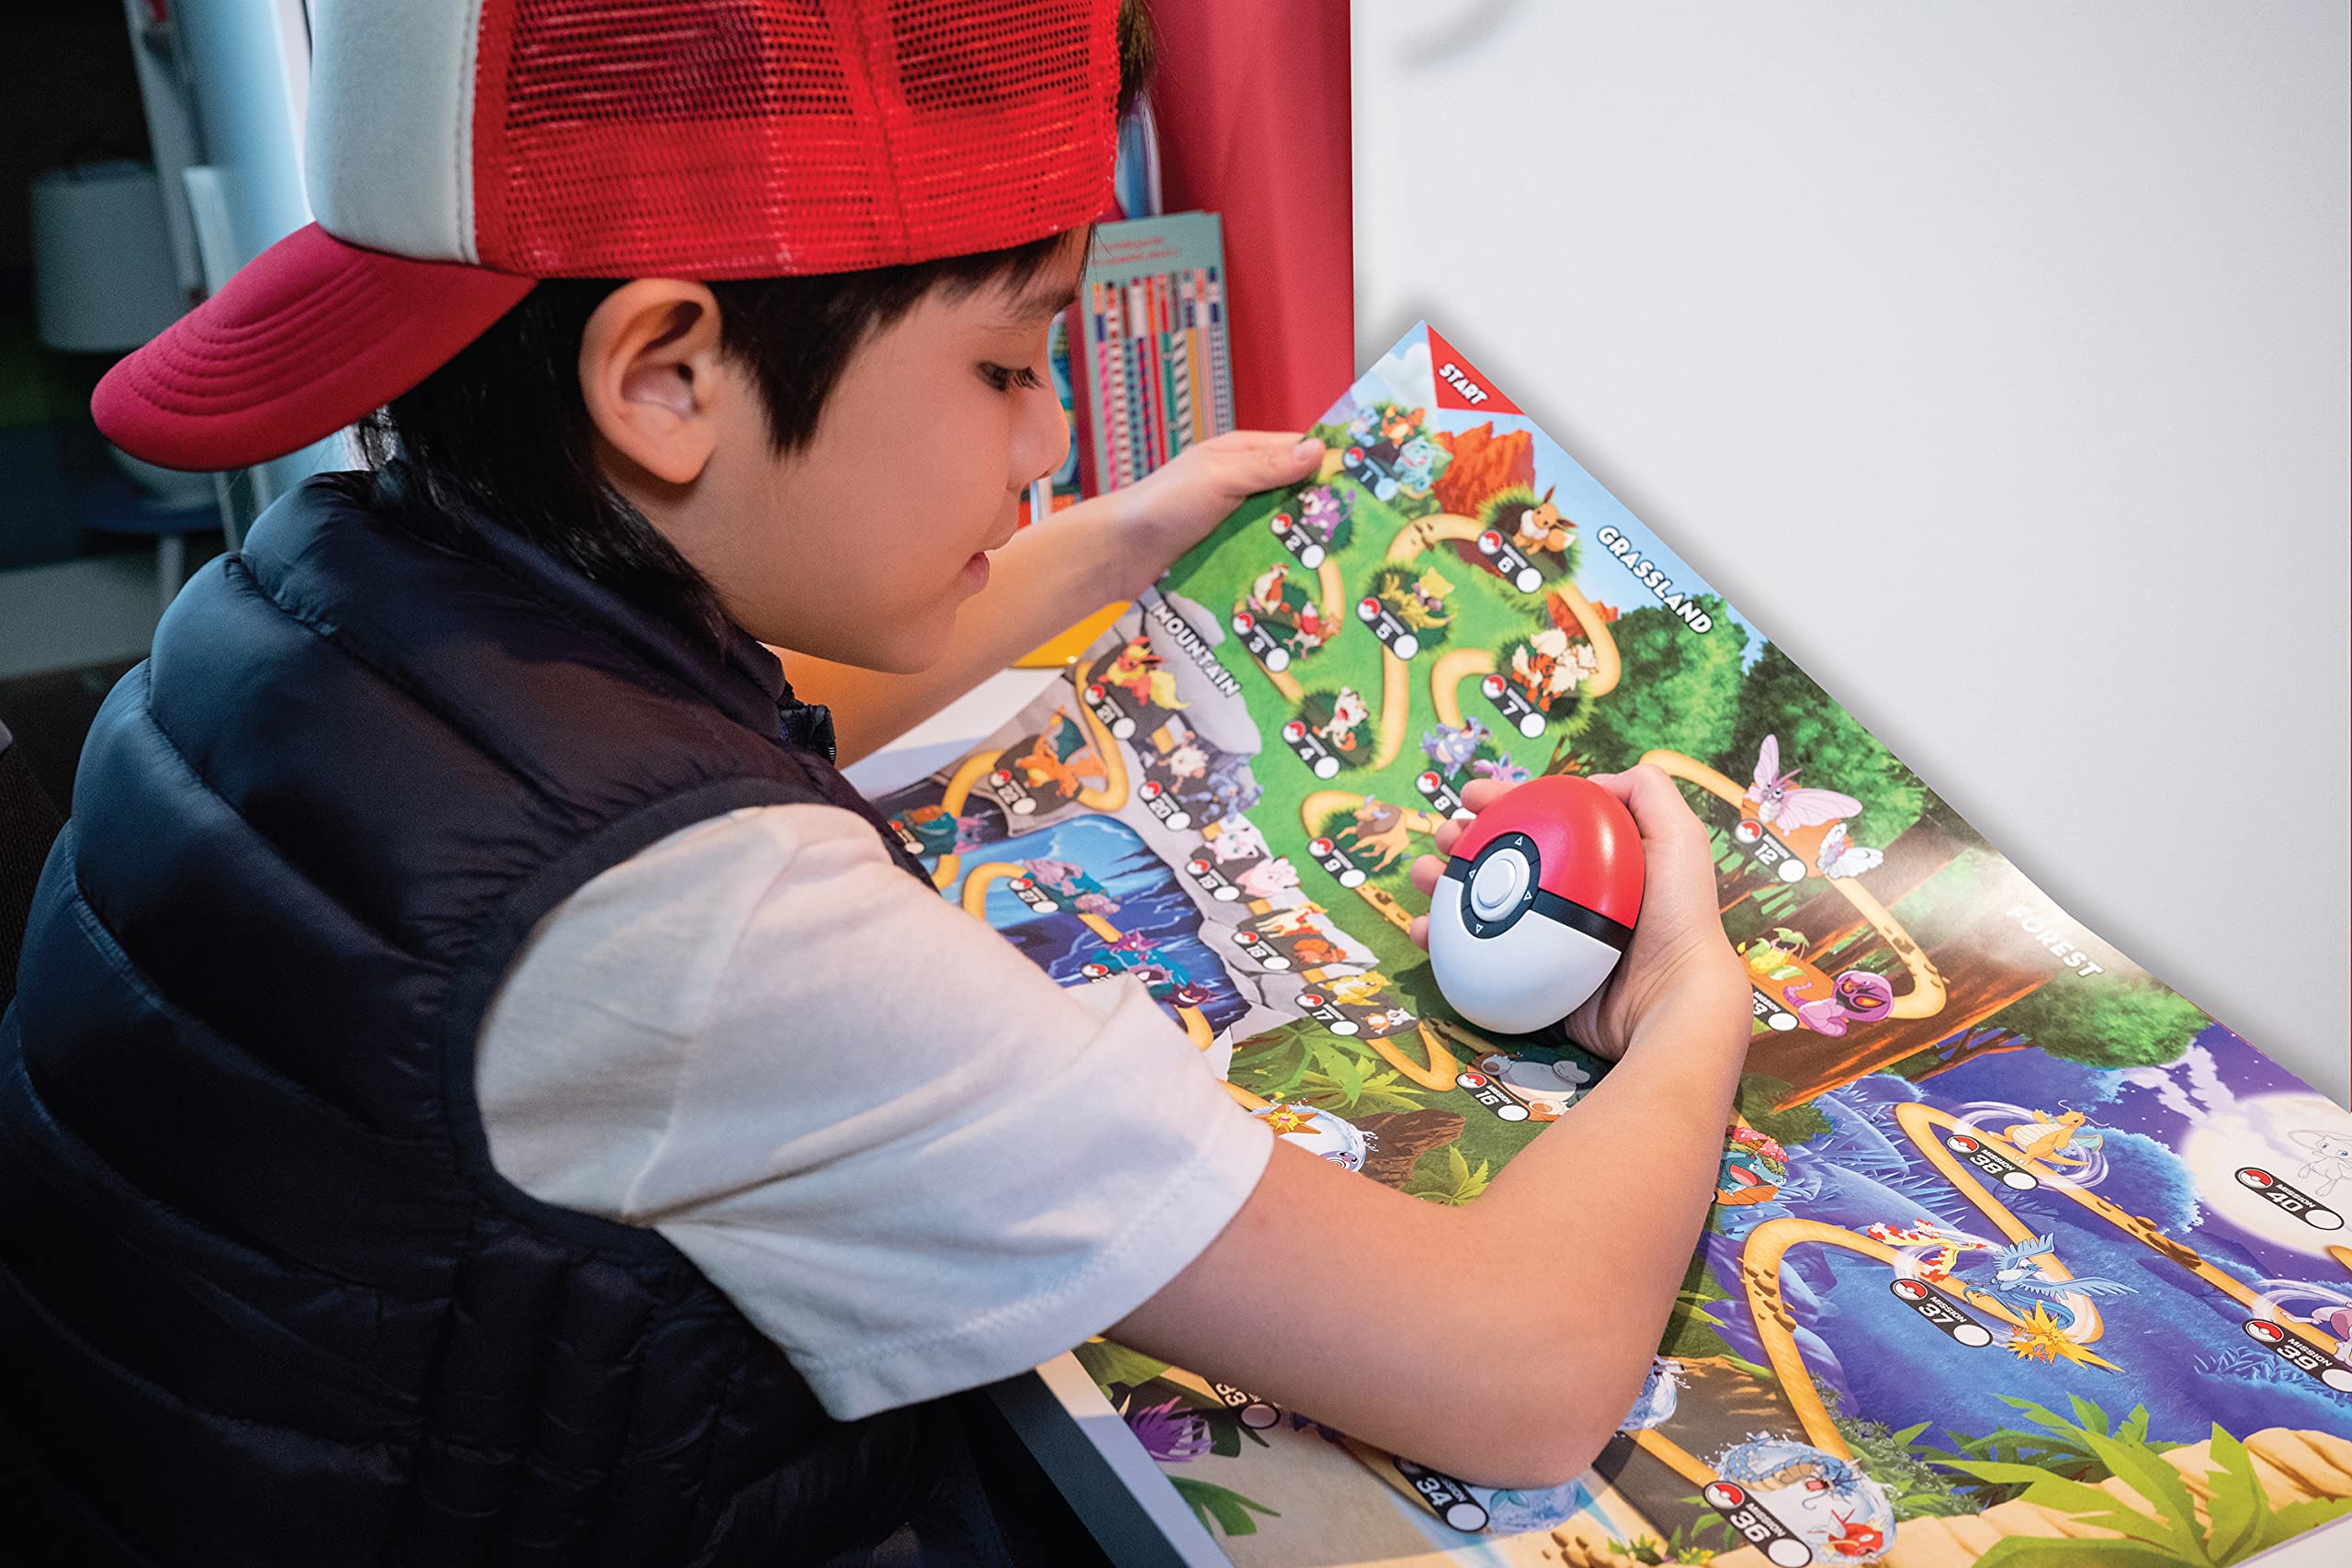 Ultra Pro Pokémon Trainer Mission Toy, The Pokémon Guessing Game, Play with Friends and Family and See Who Can Catch The Most Pokémon and Be The Very Best